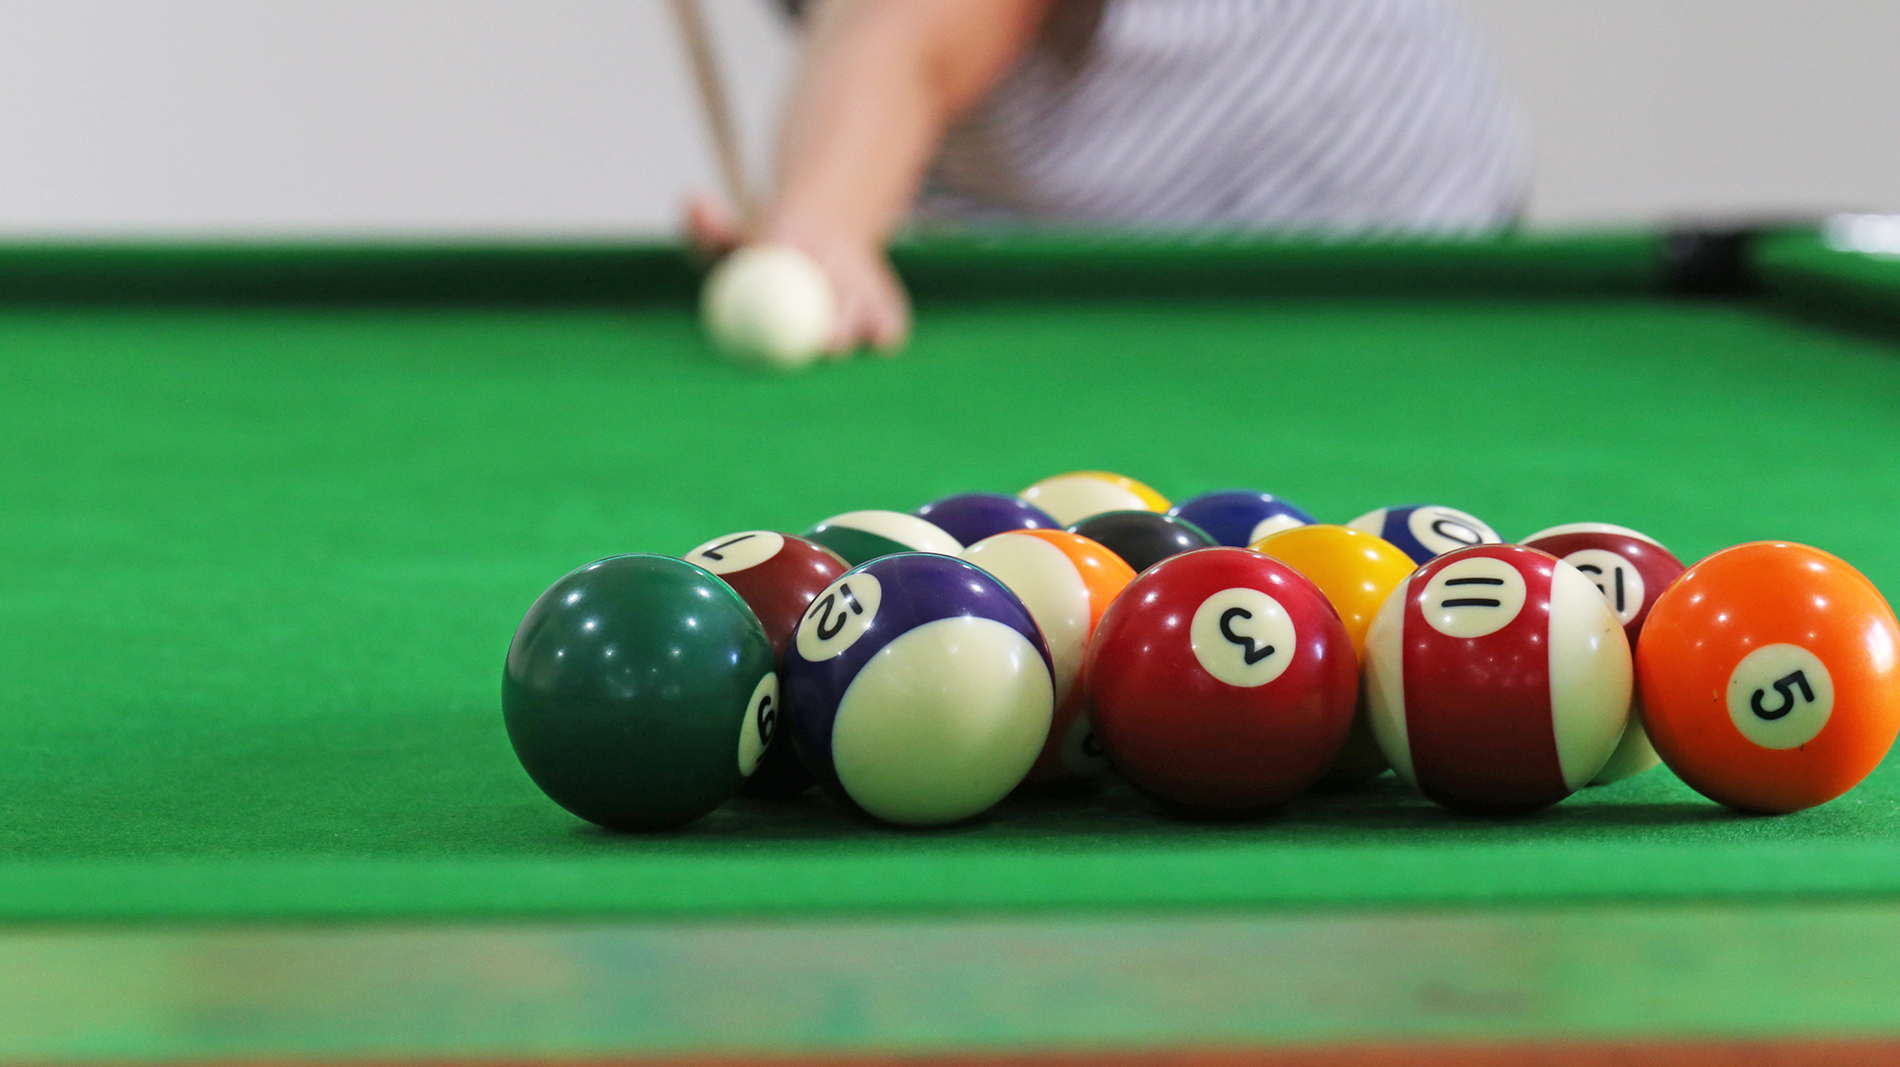 CHECK OUT THESE SNOOKER TIPS FOR BEGINNERS.